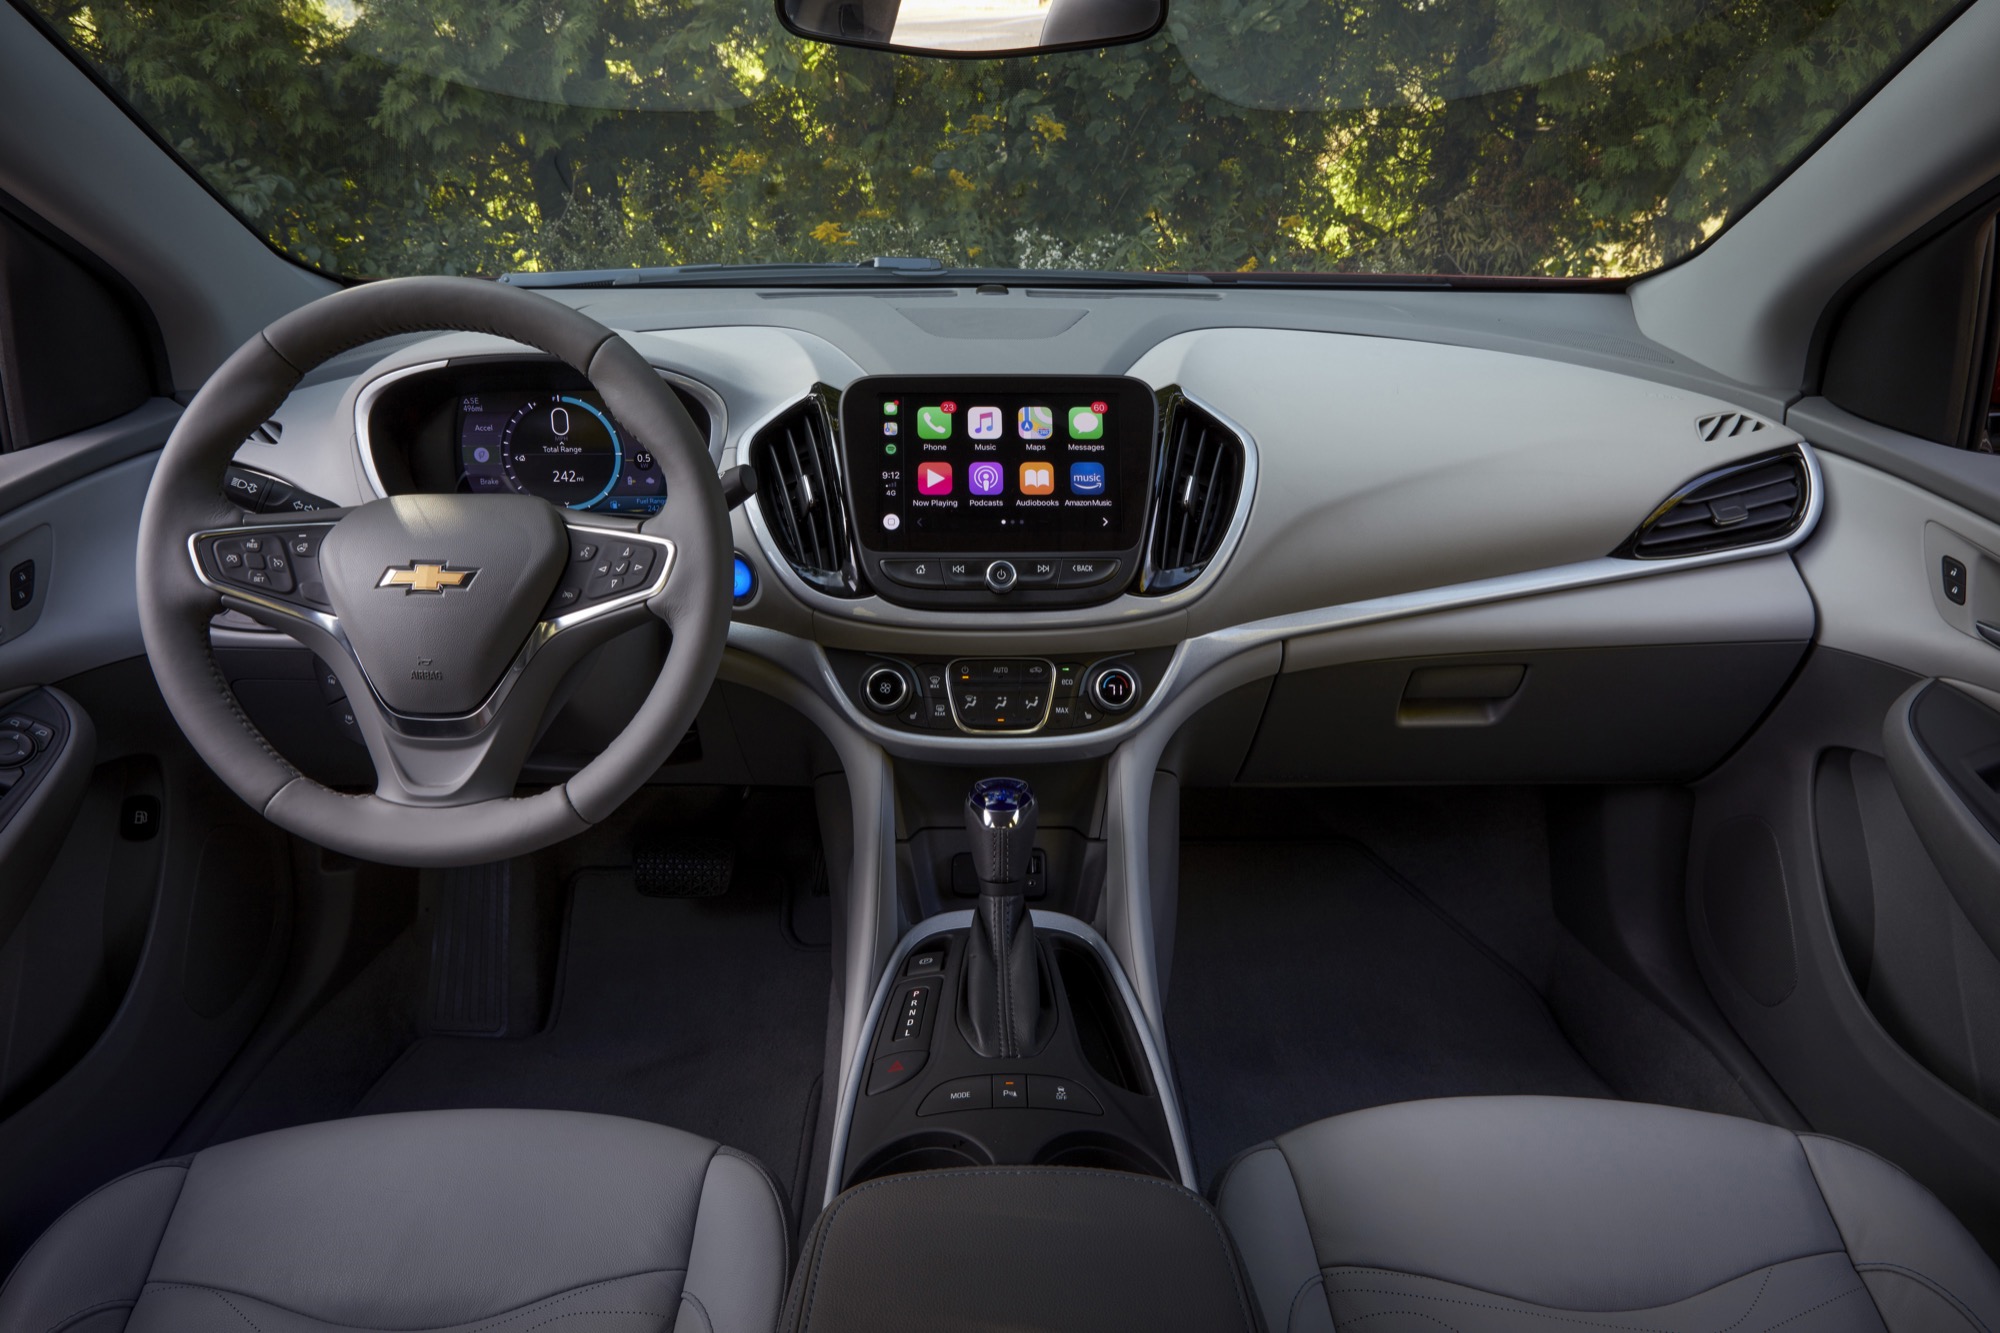 2019 Chevy Volt Pictures, Photos, Images, Gallery | GM Authority